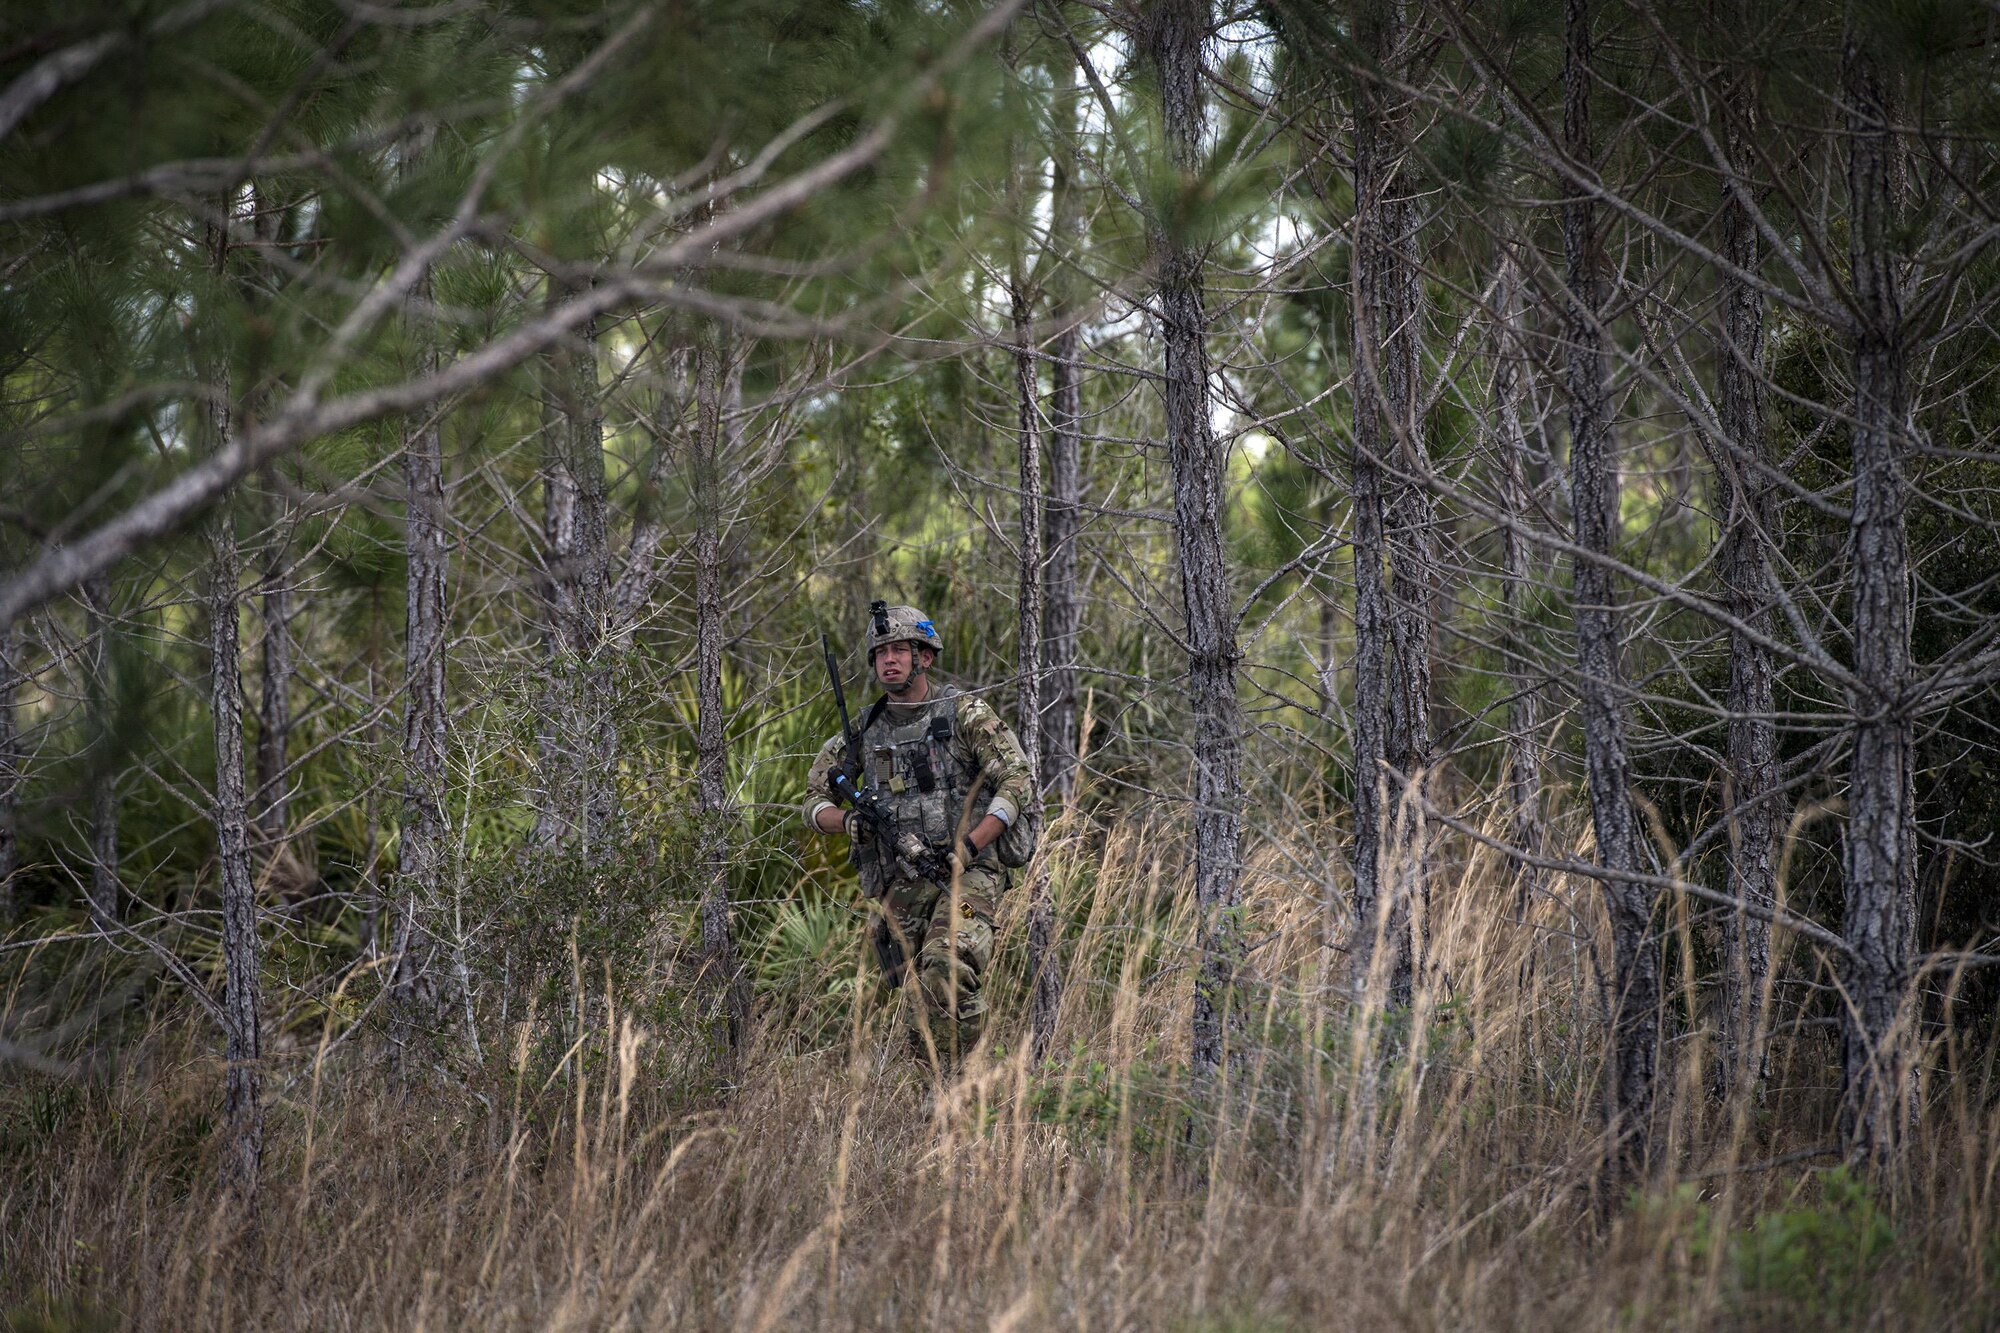 Staff Sgt. Christopher Imel, 822d Base Defense Squadron fireteam leader, patrols an area in response to reports of suspicious activity during a Mission Readiness Exercise, March 9, 2017, at Avon Park Air Force Range, Fla. The MRX took place March 2-13 and ensured the 822d BDS could efficiently deploy anywhere in the world in less than 72 hours. During the two week MRX, the squadron was evaluated on its ability to set-up a bare base, effectively thwart enemy attacks, run a secure Tactical Operation Center and maintain positive relationships with villagers in surrounding areas. (U.S. Air Force Photo by Airman 1st Class Janiqua P. Robinson)